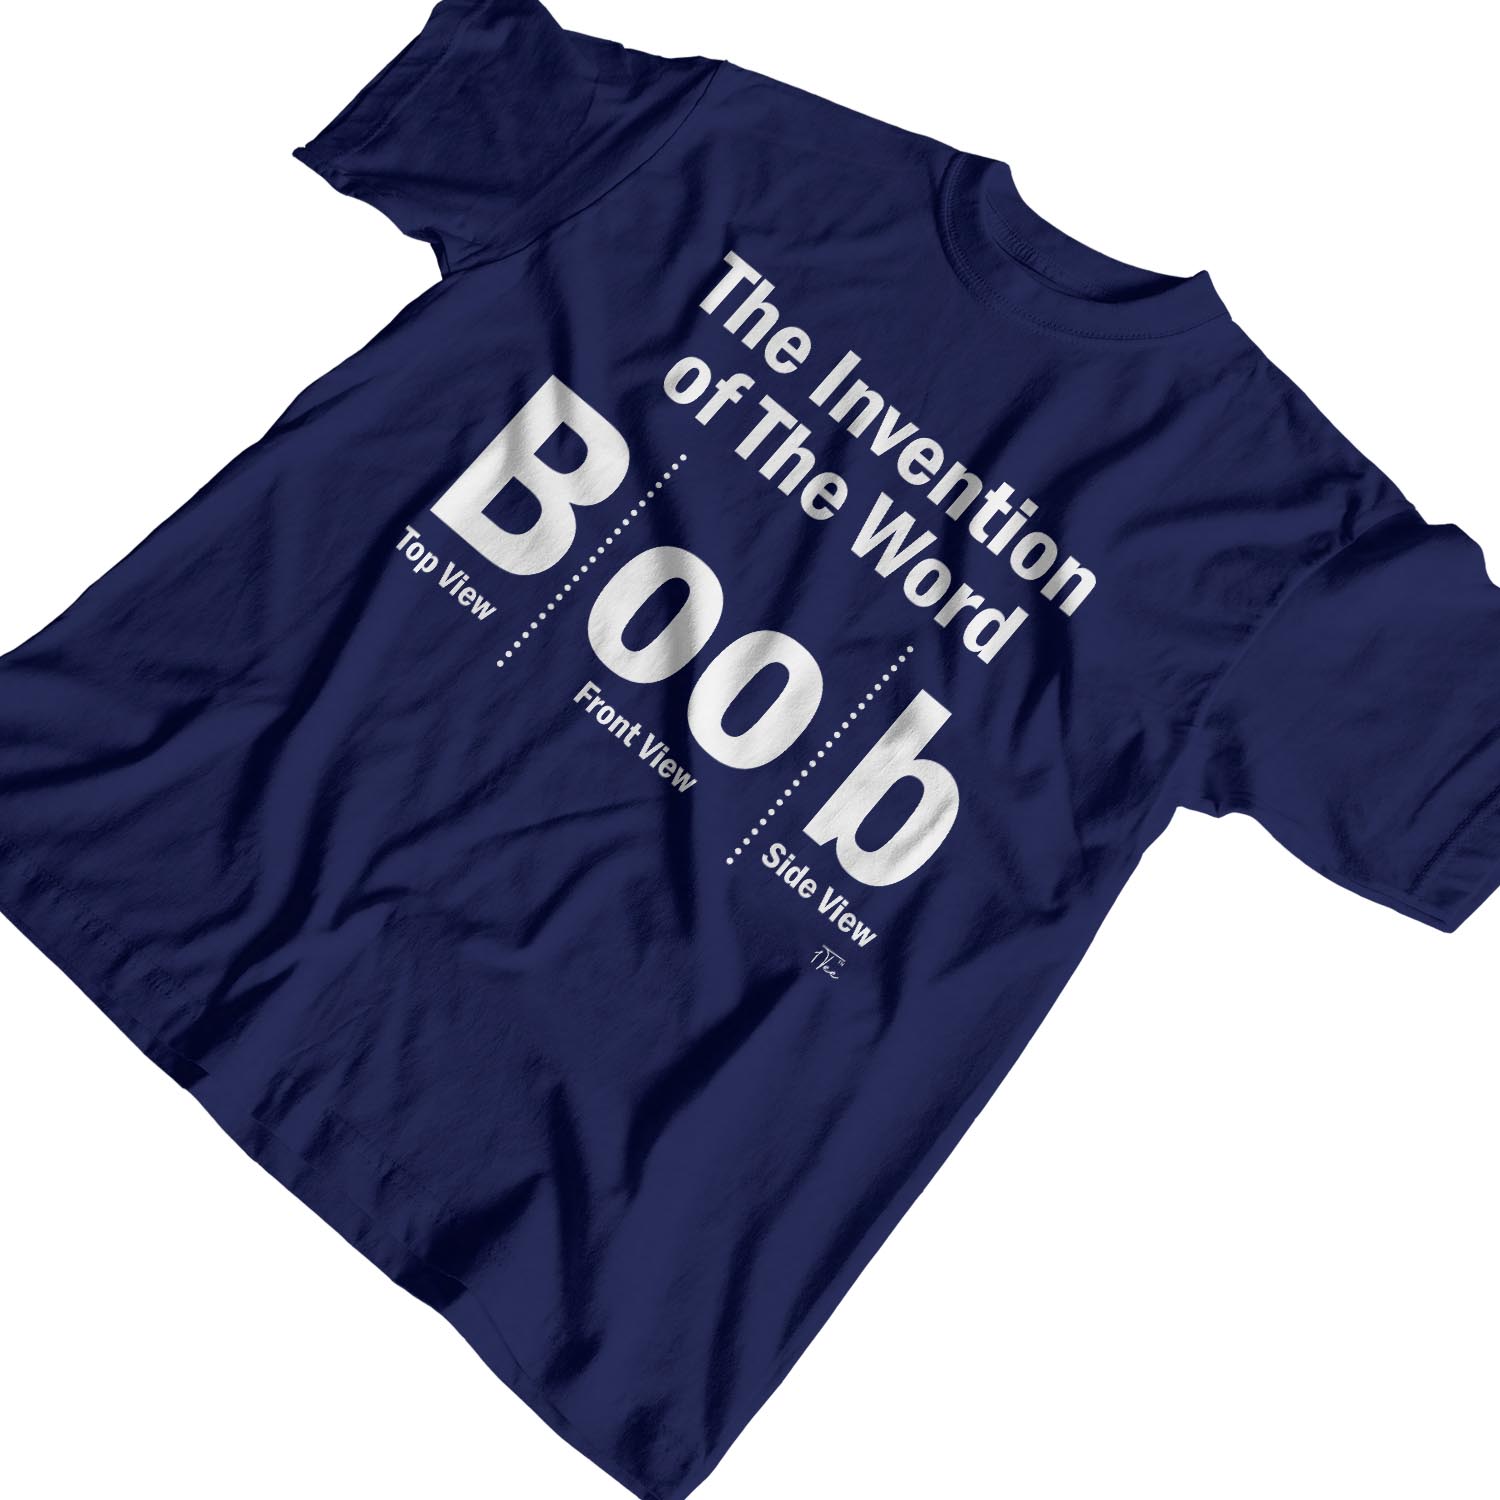 1Tee Mens Invention Of The Word Boob T-Shirt